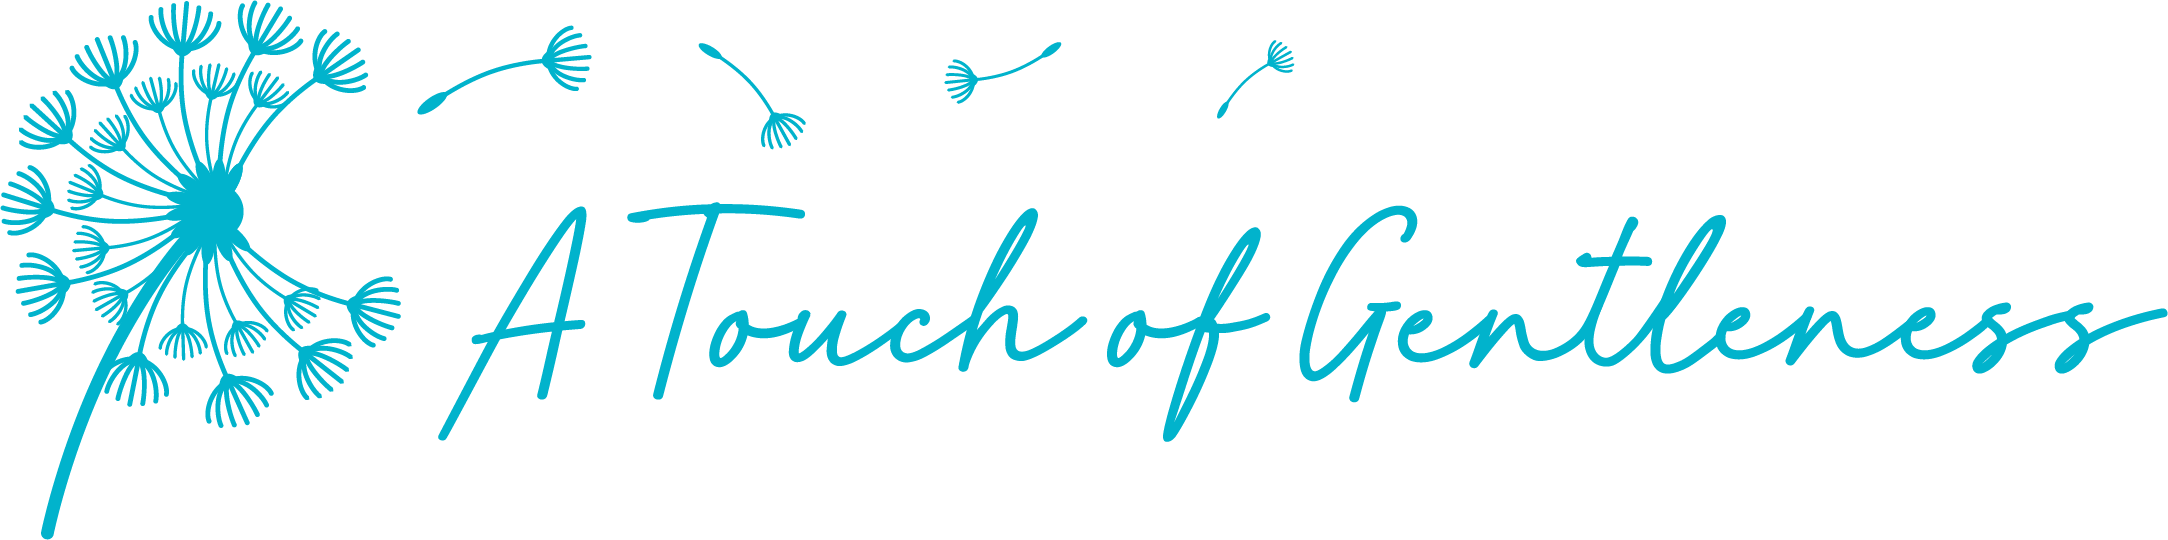 A Touch of Gentleness logo